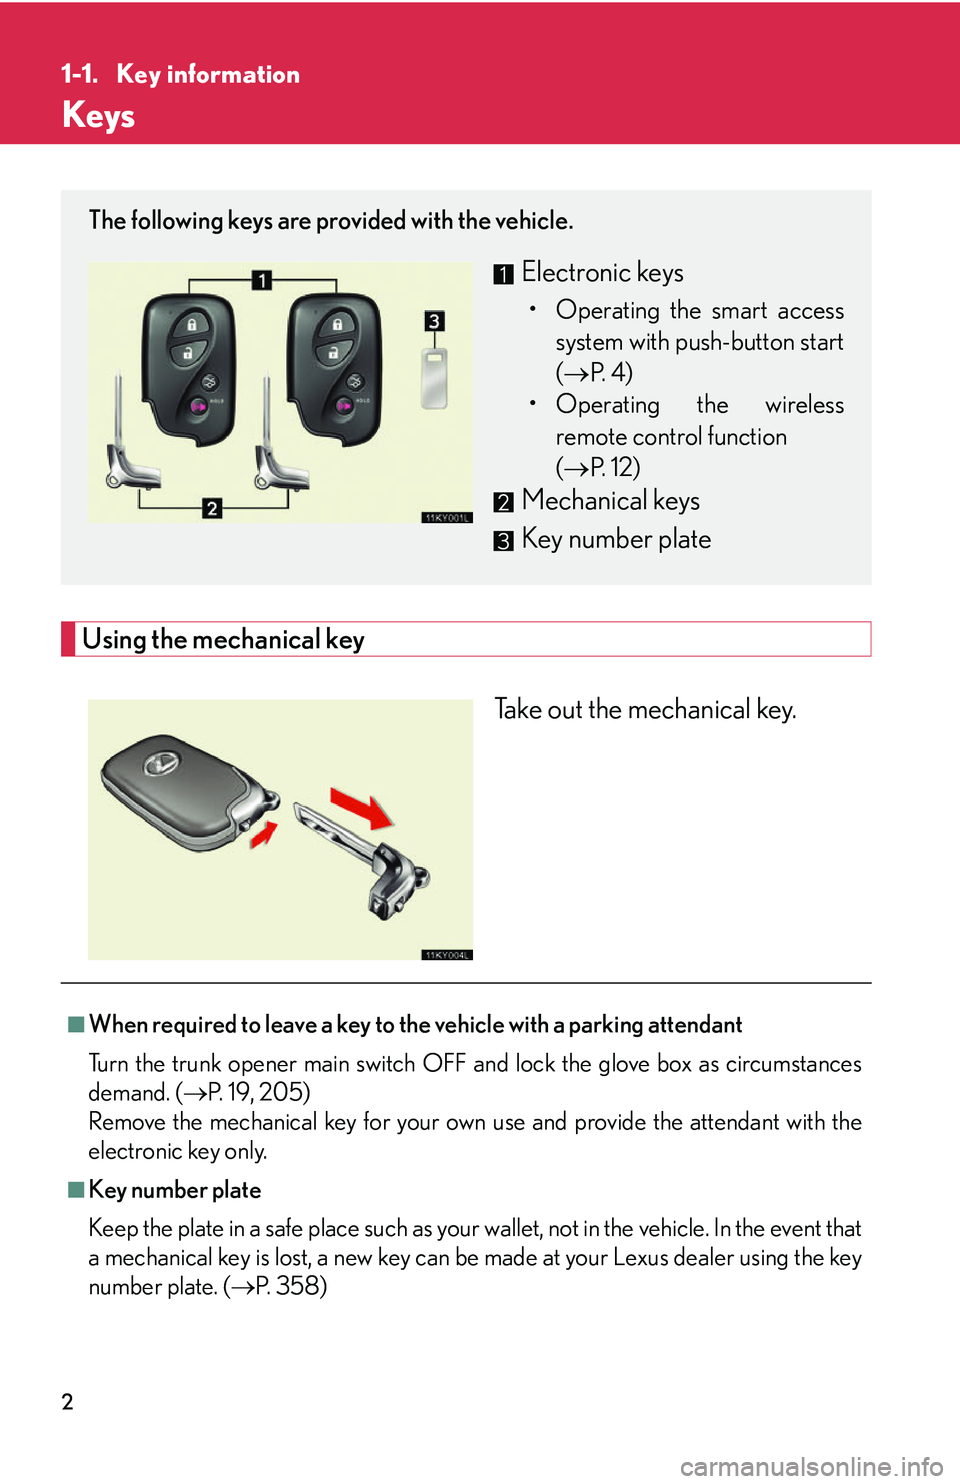 Lexus IS250 2006  Opening, closing and locking the doors and trunk / LEXUS 2006 IS350/250 THROUGH APRIL 2006 PROD.  (OM53508U) User Guide 2
1-1. Key information
Keys
Using the mechanical keyTake out the mechanical key.
The following keys are provided with the vehicle.
Electronic keys
• Operating the smart accesssystem with push-button